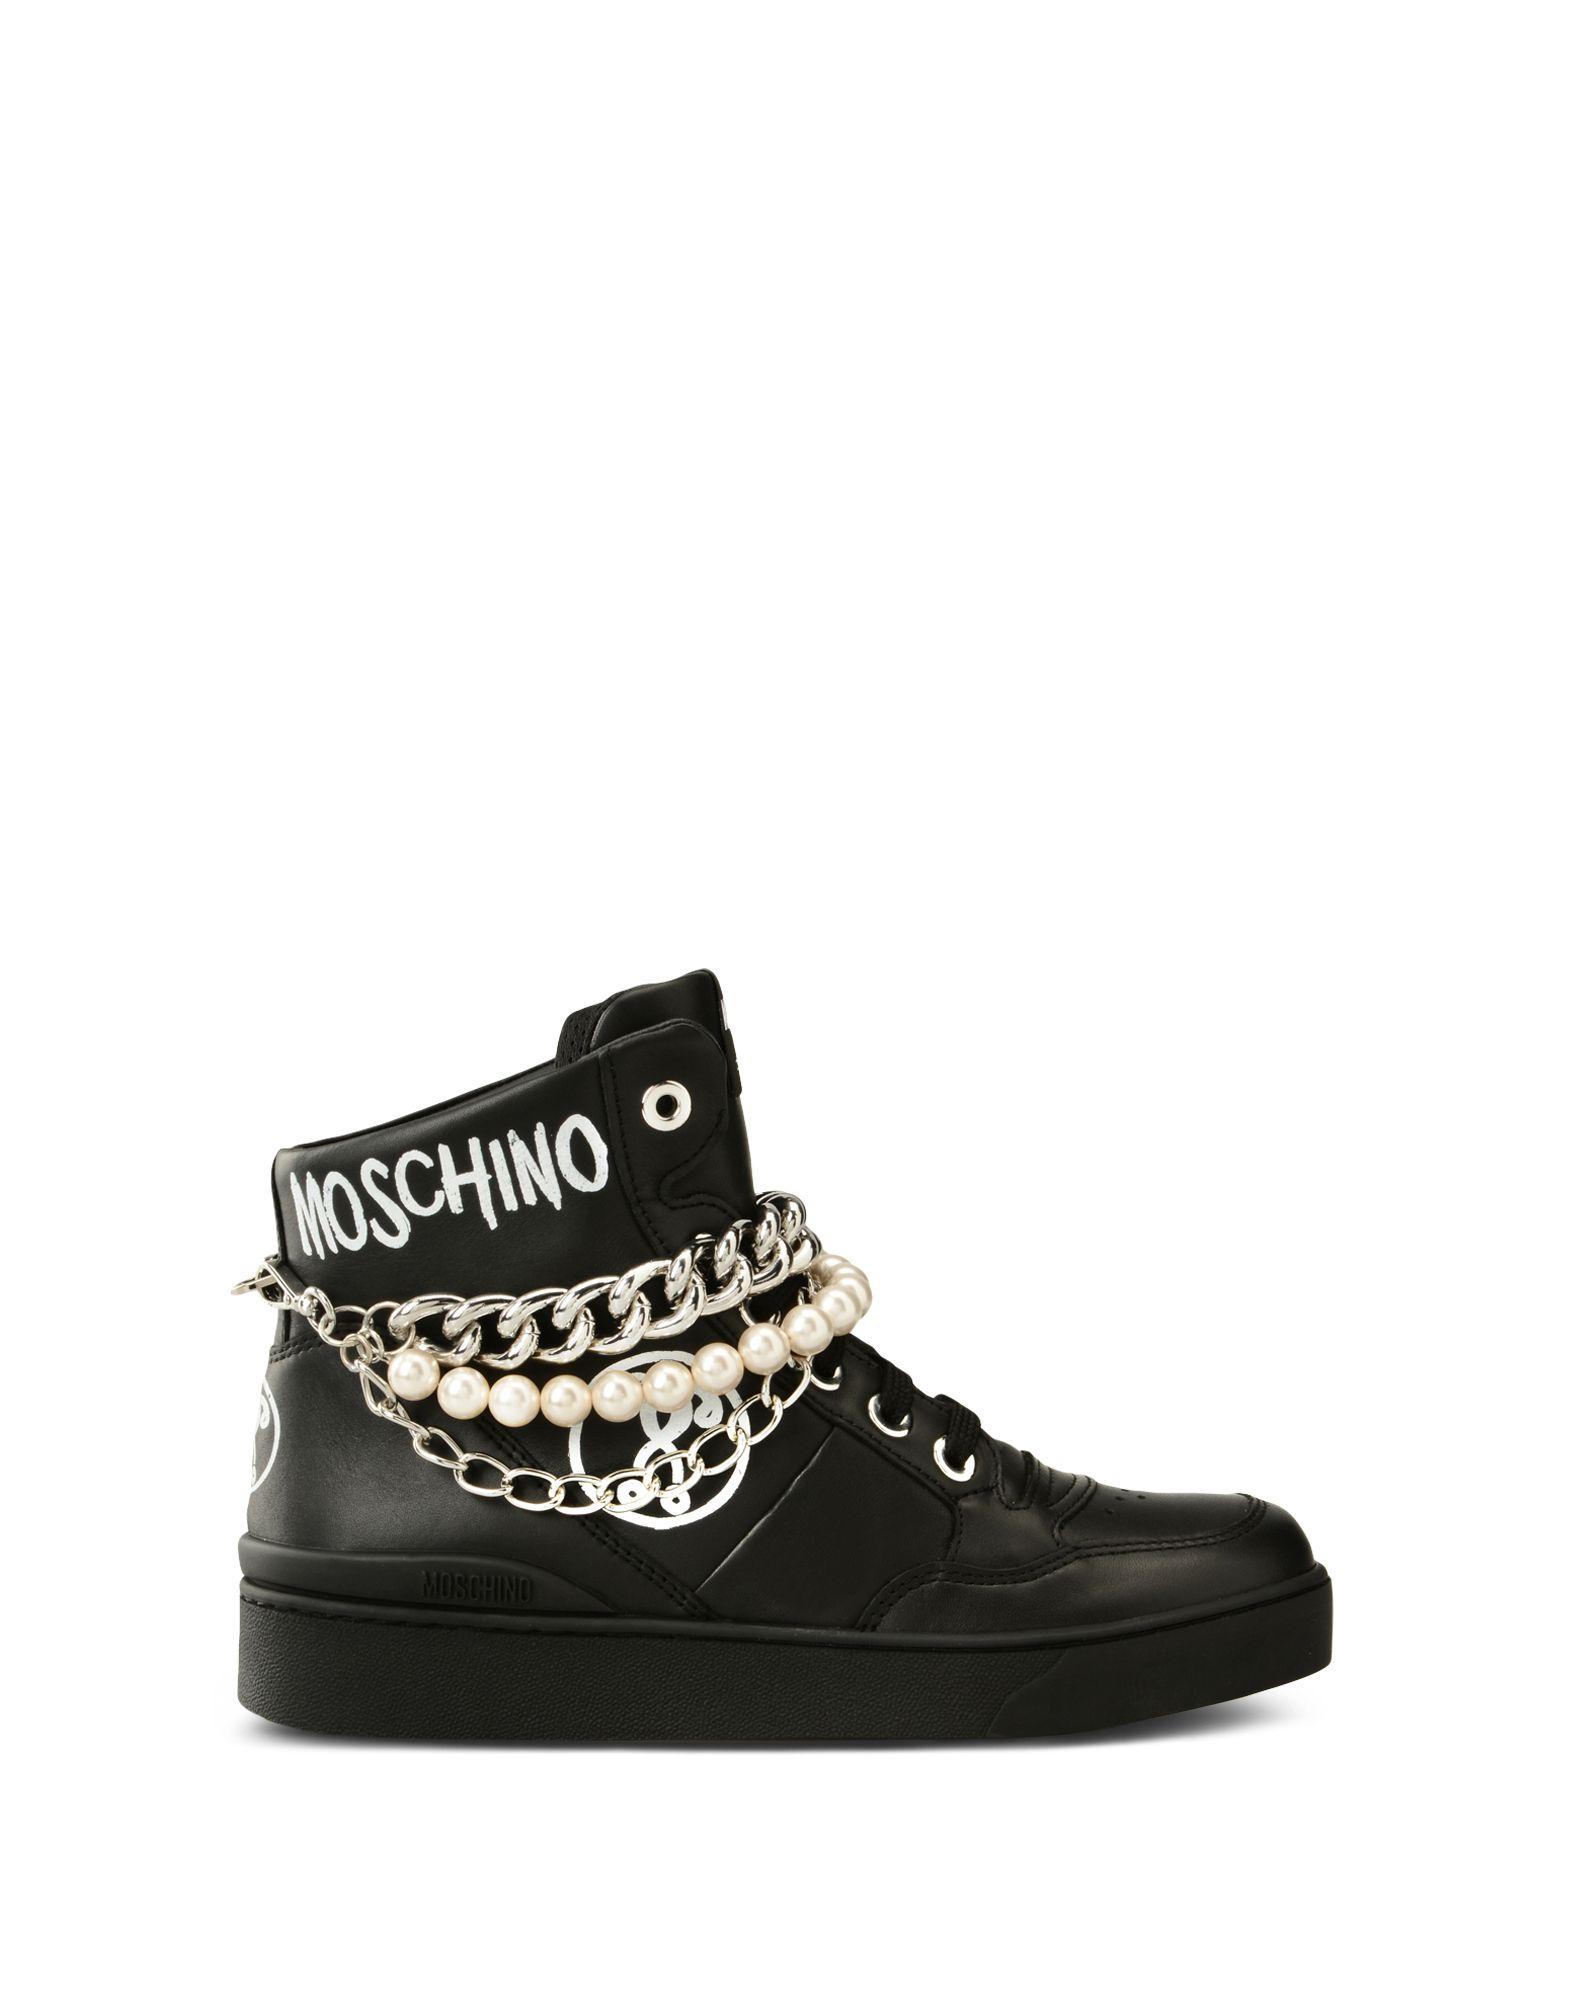 Moschino Leather Sneakers in Black for Men | Lyst